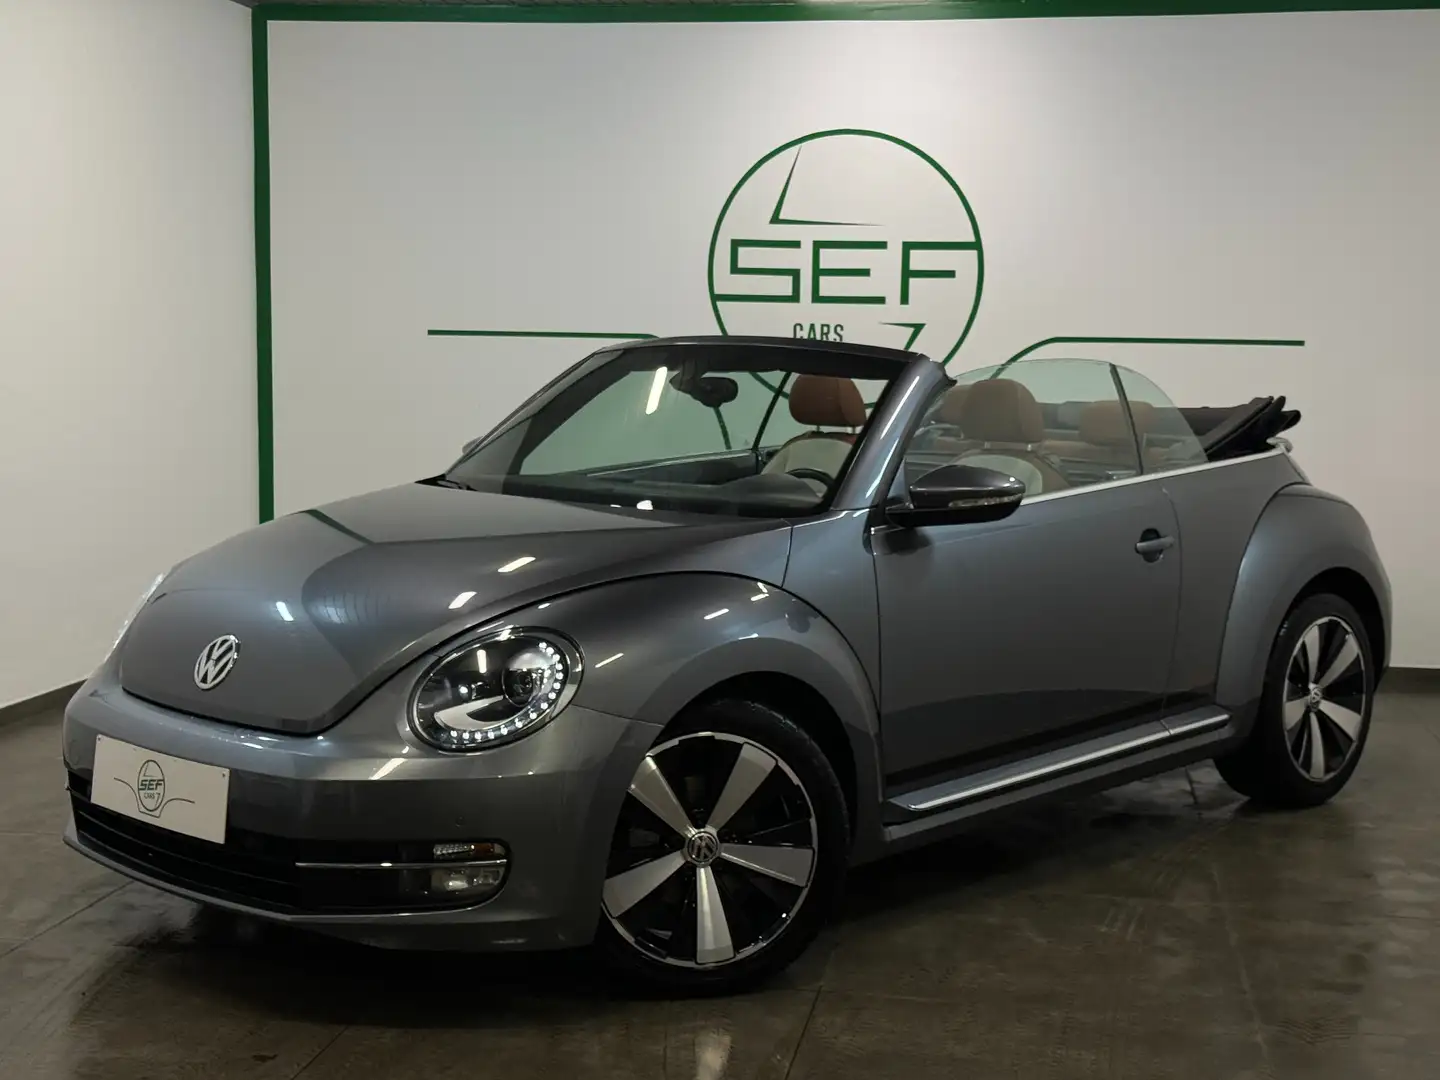 Volkswagen Beetle ** 1.6 CR TDi ** Editions Cup ** Gps ** A/C ** Szary - 1